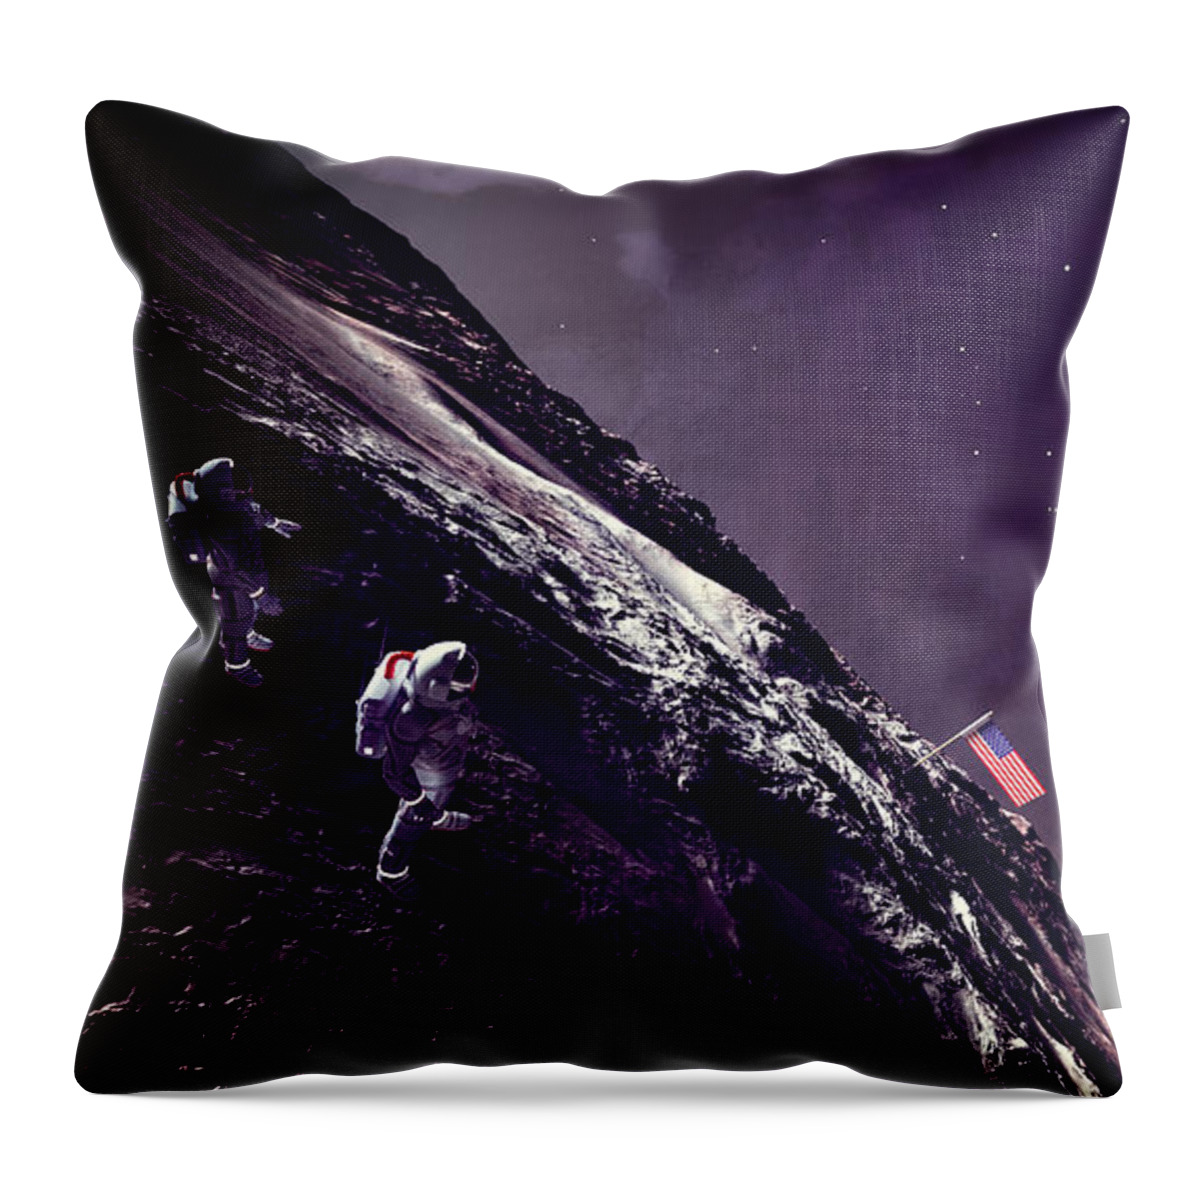 Earth Rise On The Moon Throw Pillow featuring the digital art Earth Rise On The Moon by Two Hivelys